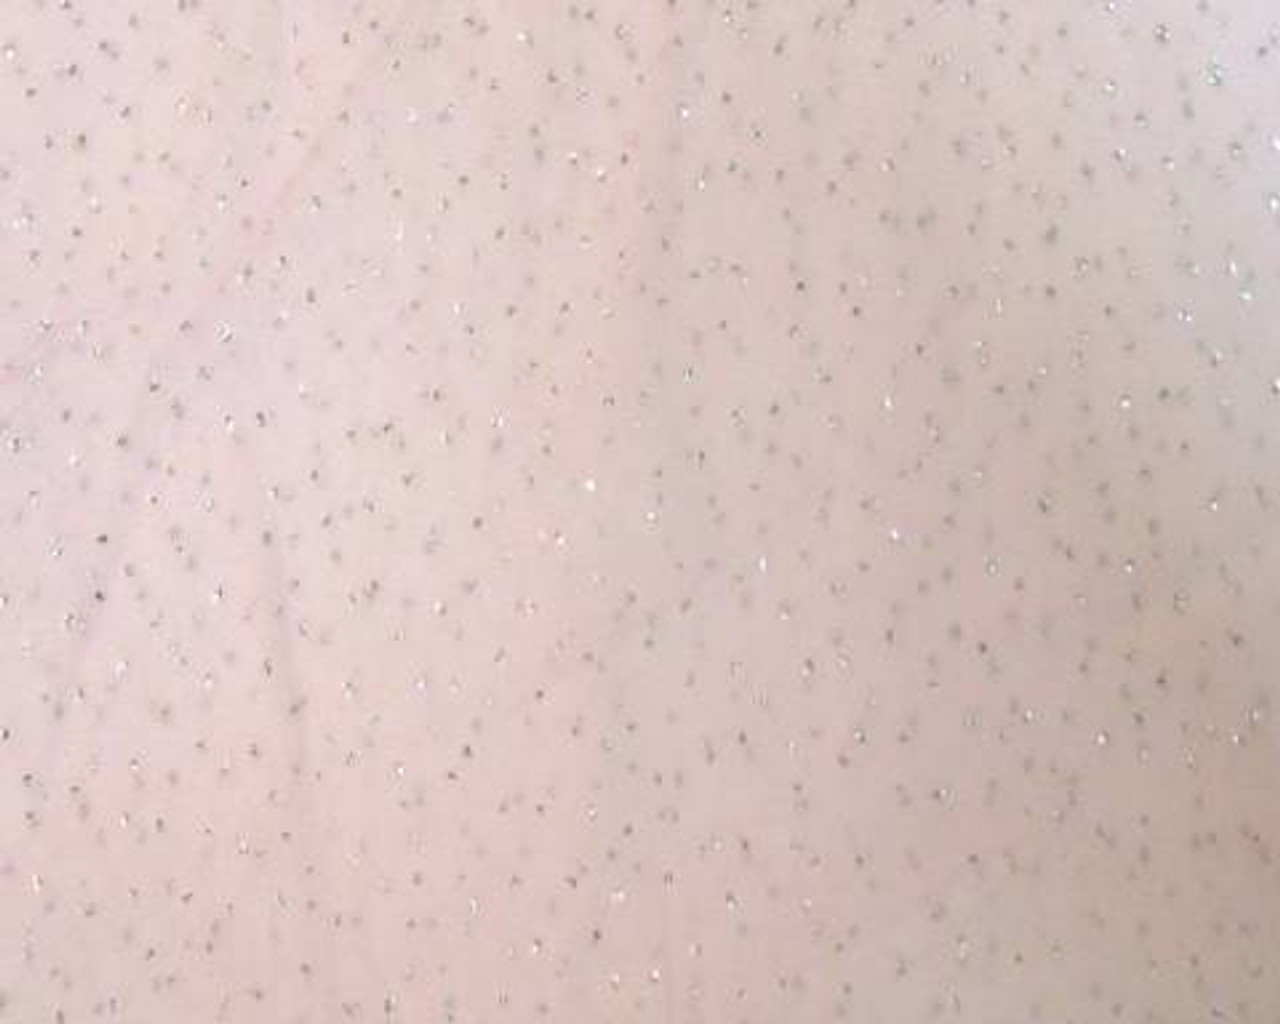 PINK Sparkle Glitter Tulle Decoration Event Fabric (60 in.) Sold BTY